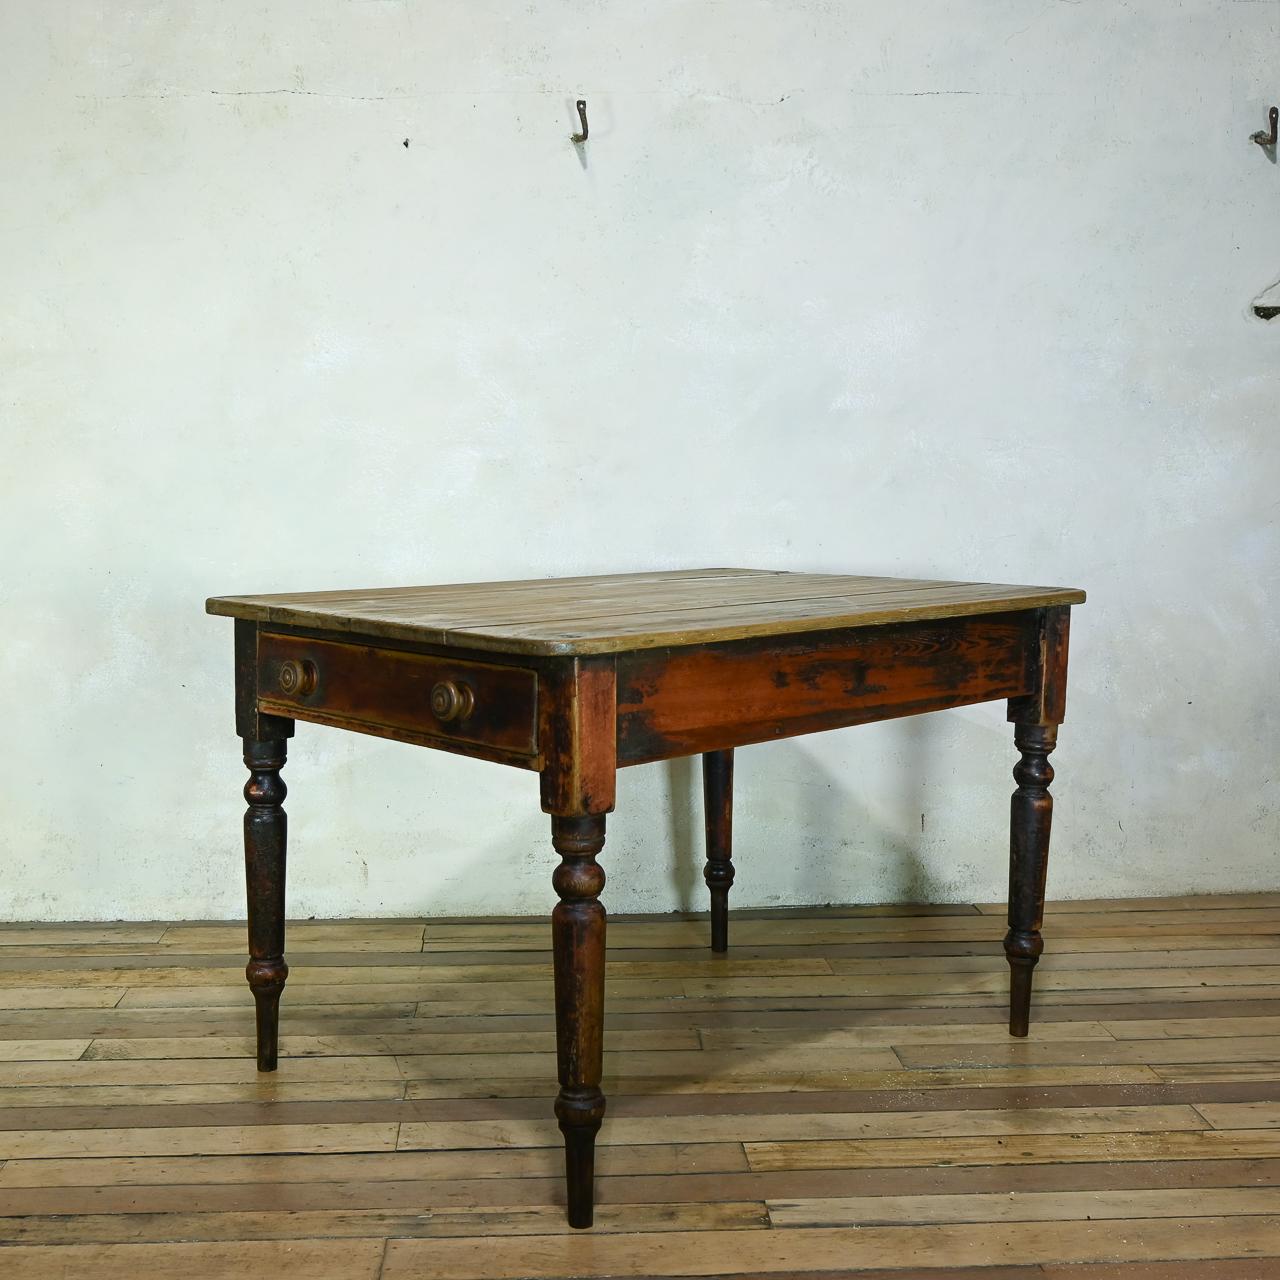 A charming early 19th century farmhouse Kitchen table. Raised on elongated turned legs featuring a lovely patina, with elements of original paint throughout. Housing a full-length deep drawer to one end of the apron.

Height - 69cm  
Width -